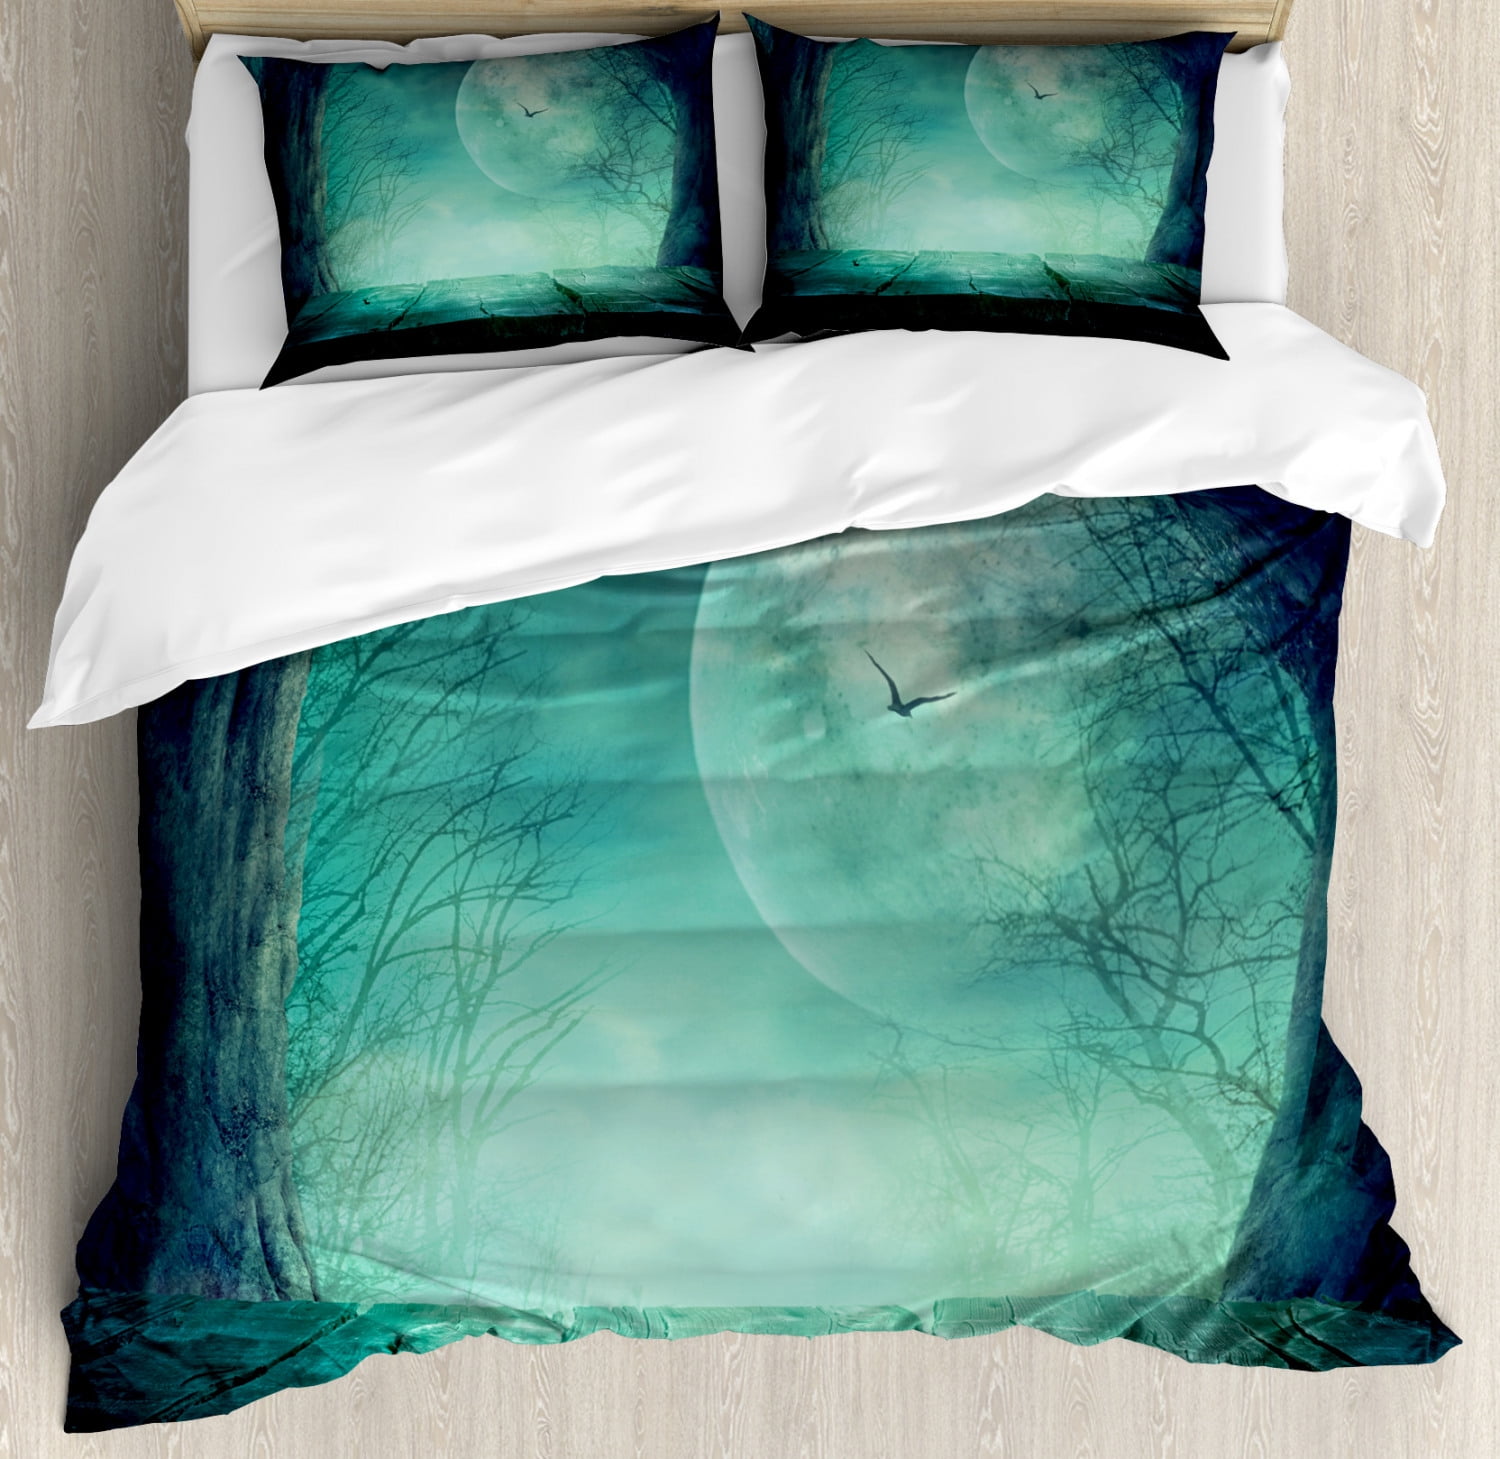 Halloween Duvet Cover Set Twin Size, Spooky Teal Forest Moon and Vain  Branches Mystical Haunted Horror Rustic Imagery Print, Decorative 2 Piece  Bedding Set with 1 Pillow Sham, Teal, by Ambesonne - Walmart.com